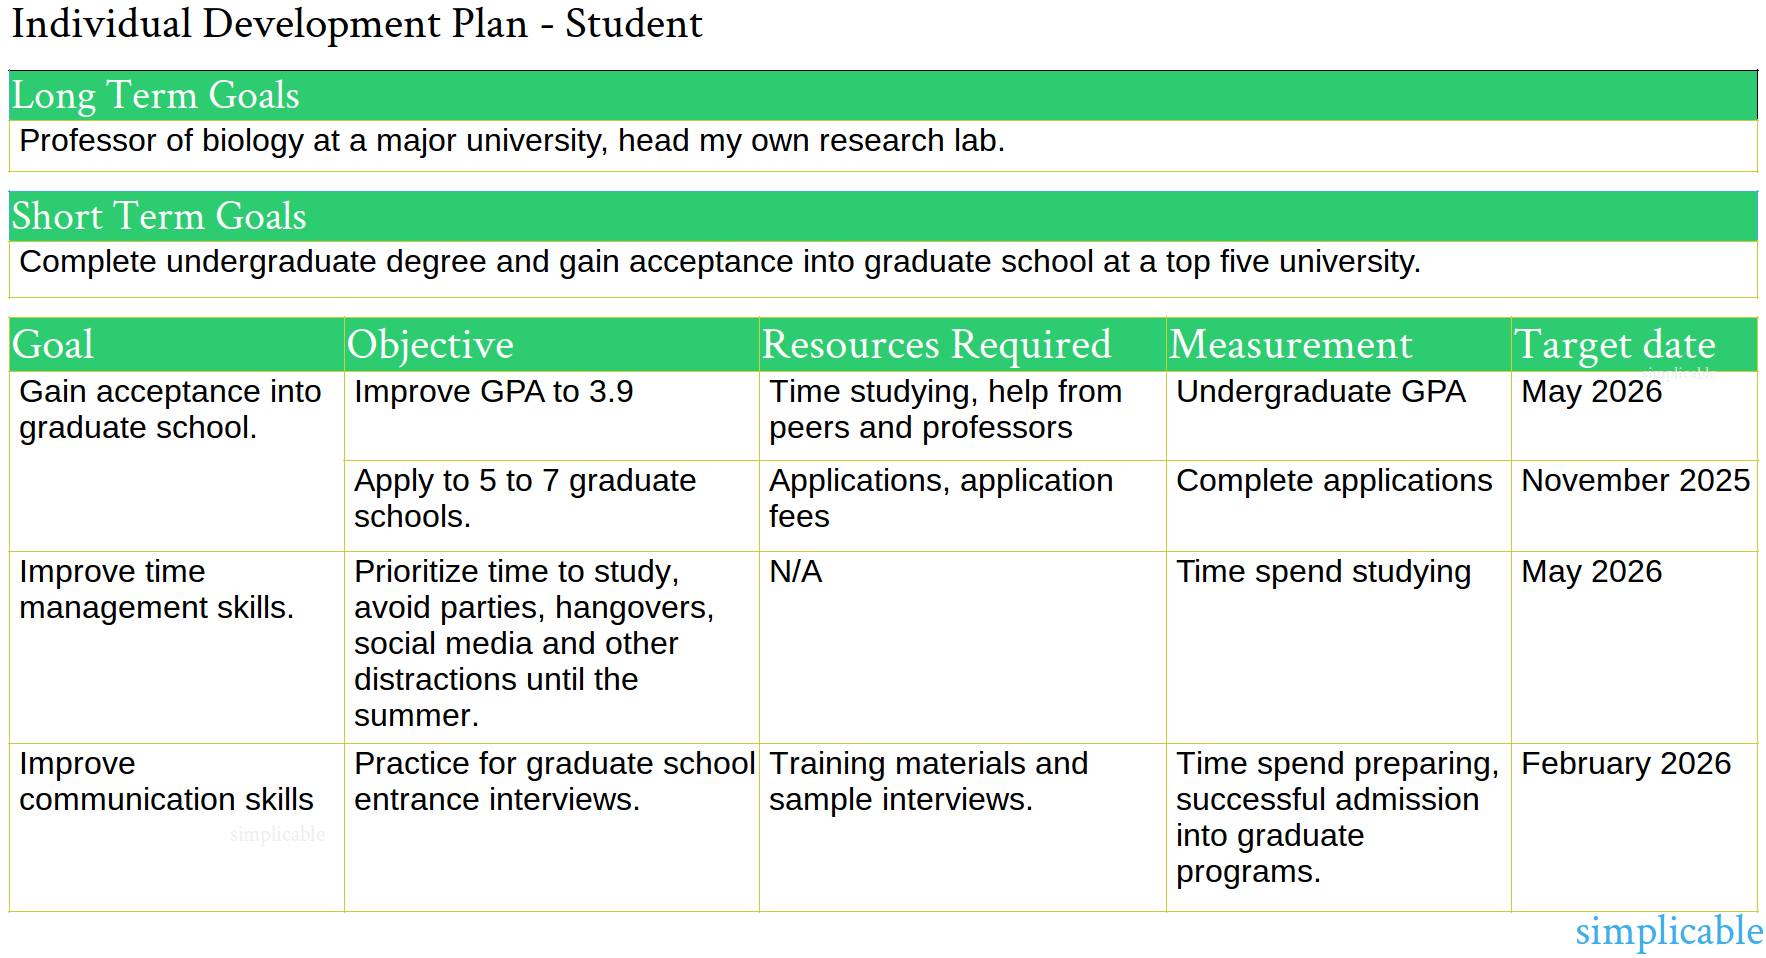 An example individual development plan for a student with concrete goals.  In many cases, students goals are more exploratory in nature.